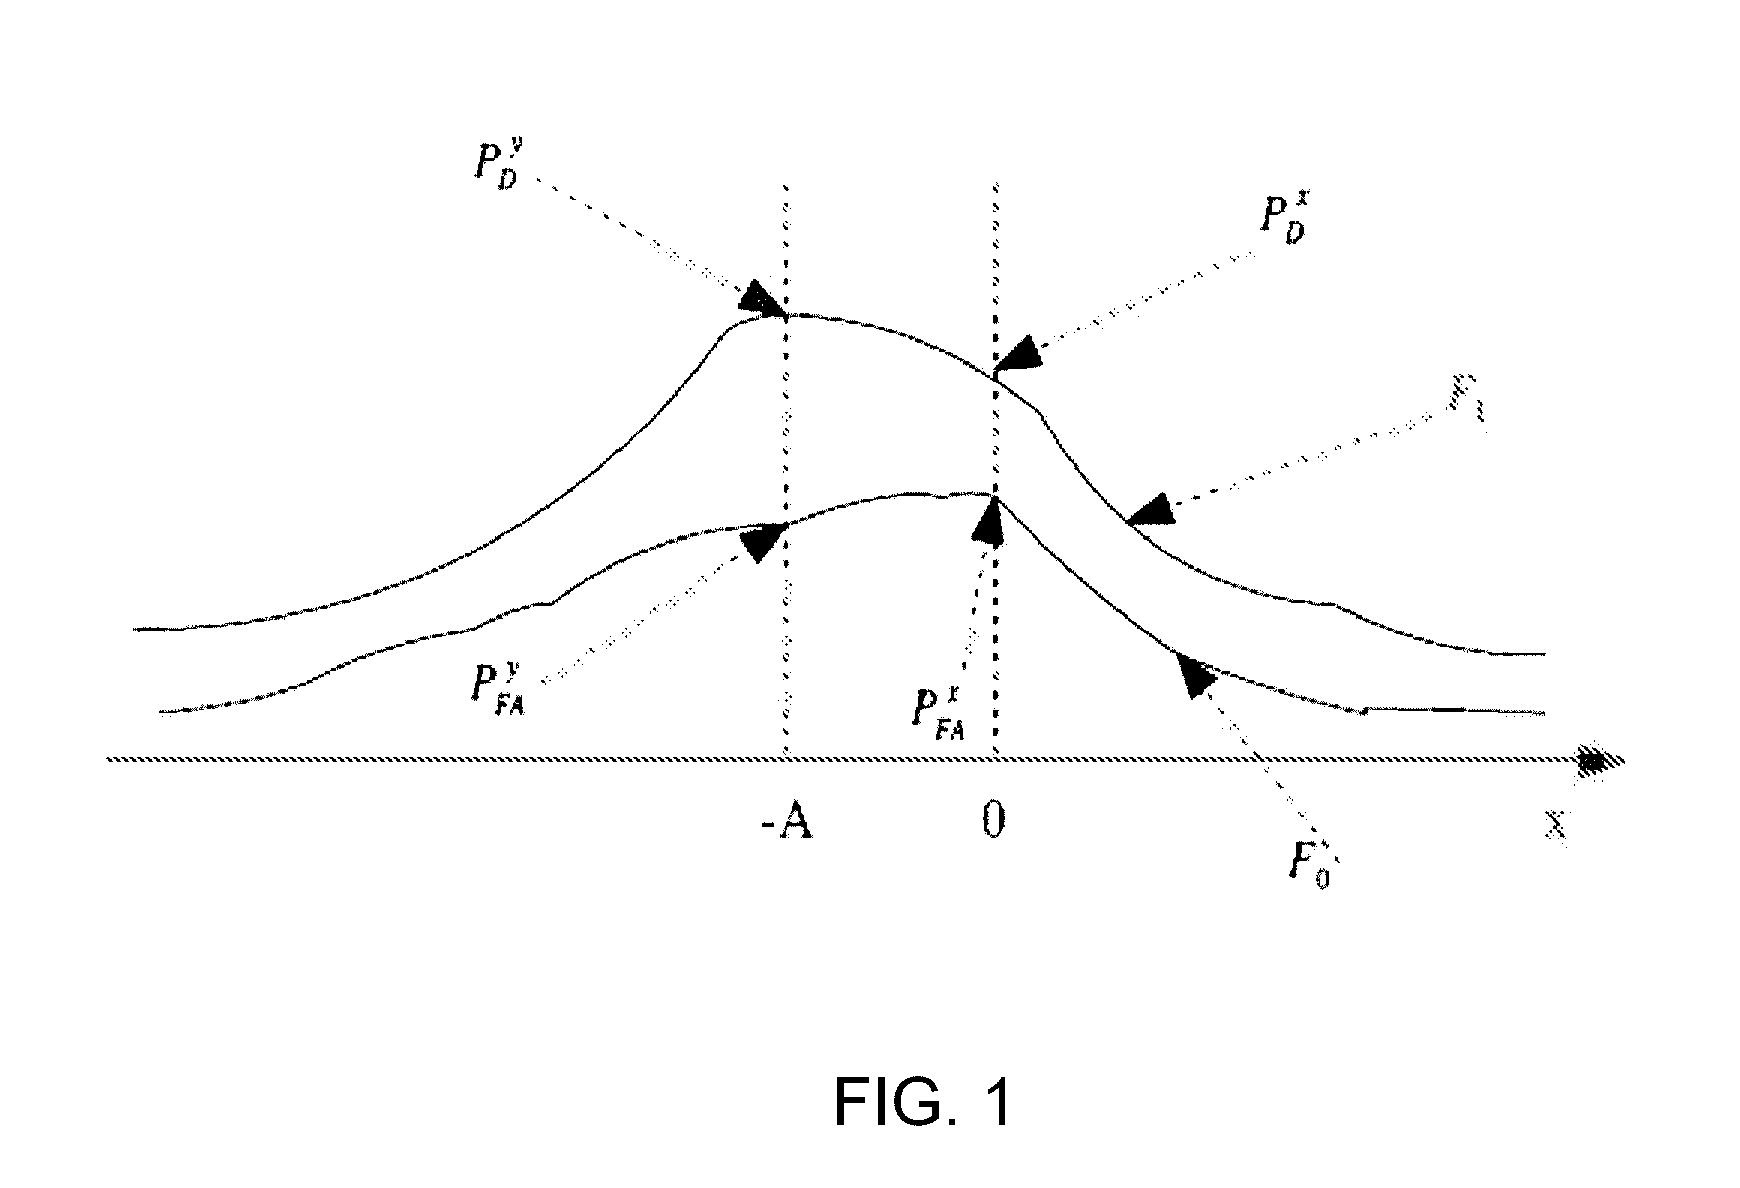 Optimized Stochastic Resonance Method for Signal Detection and Image Processing